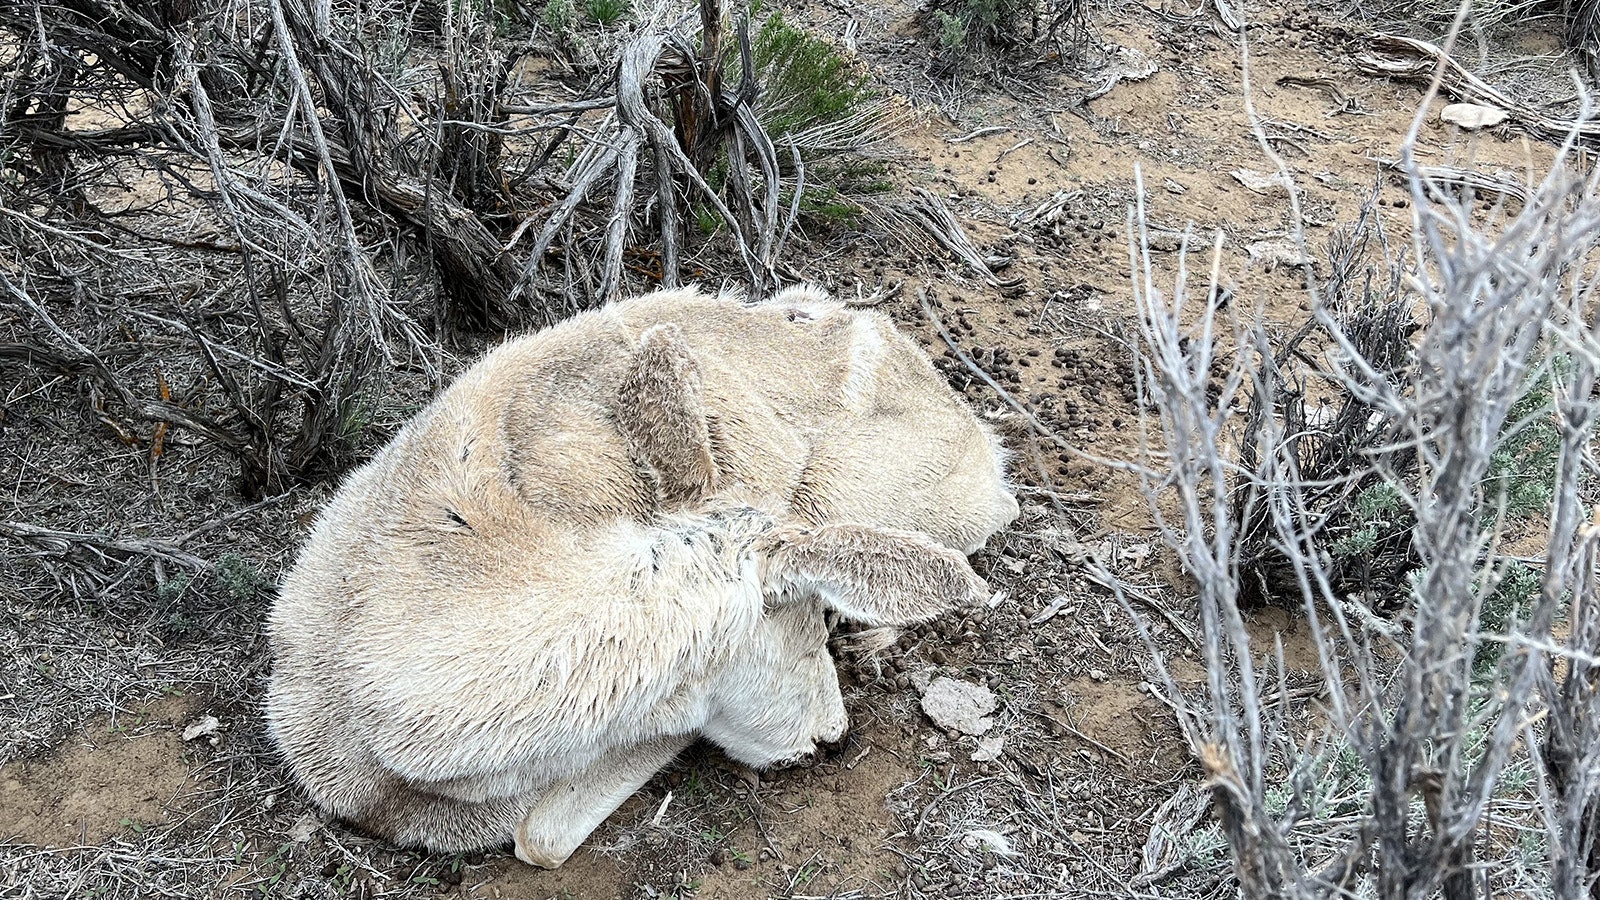 After shedding his antlers, this buck curled up and died on the range near La Barge, one of thousands of deer from the Wyoming Range herd that perished this winter and spring.